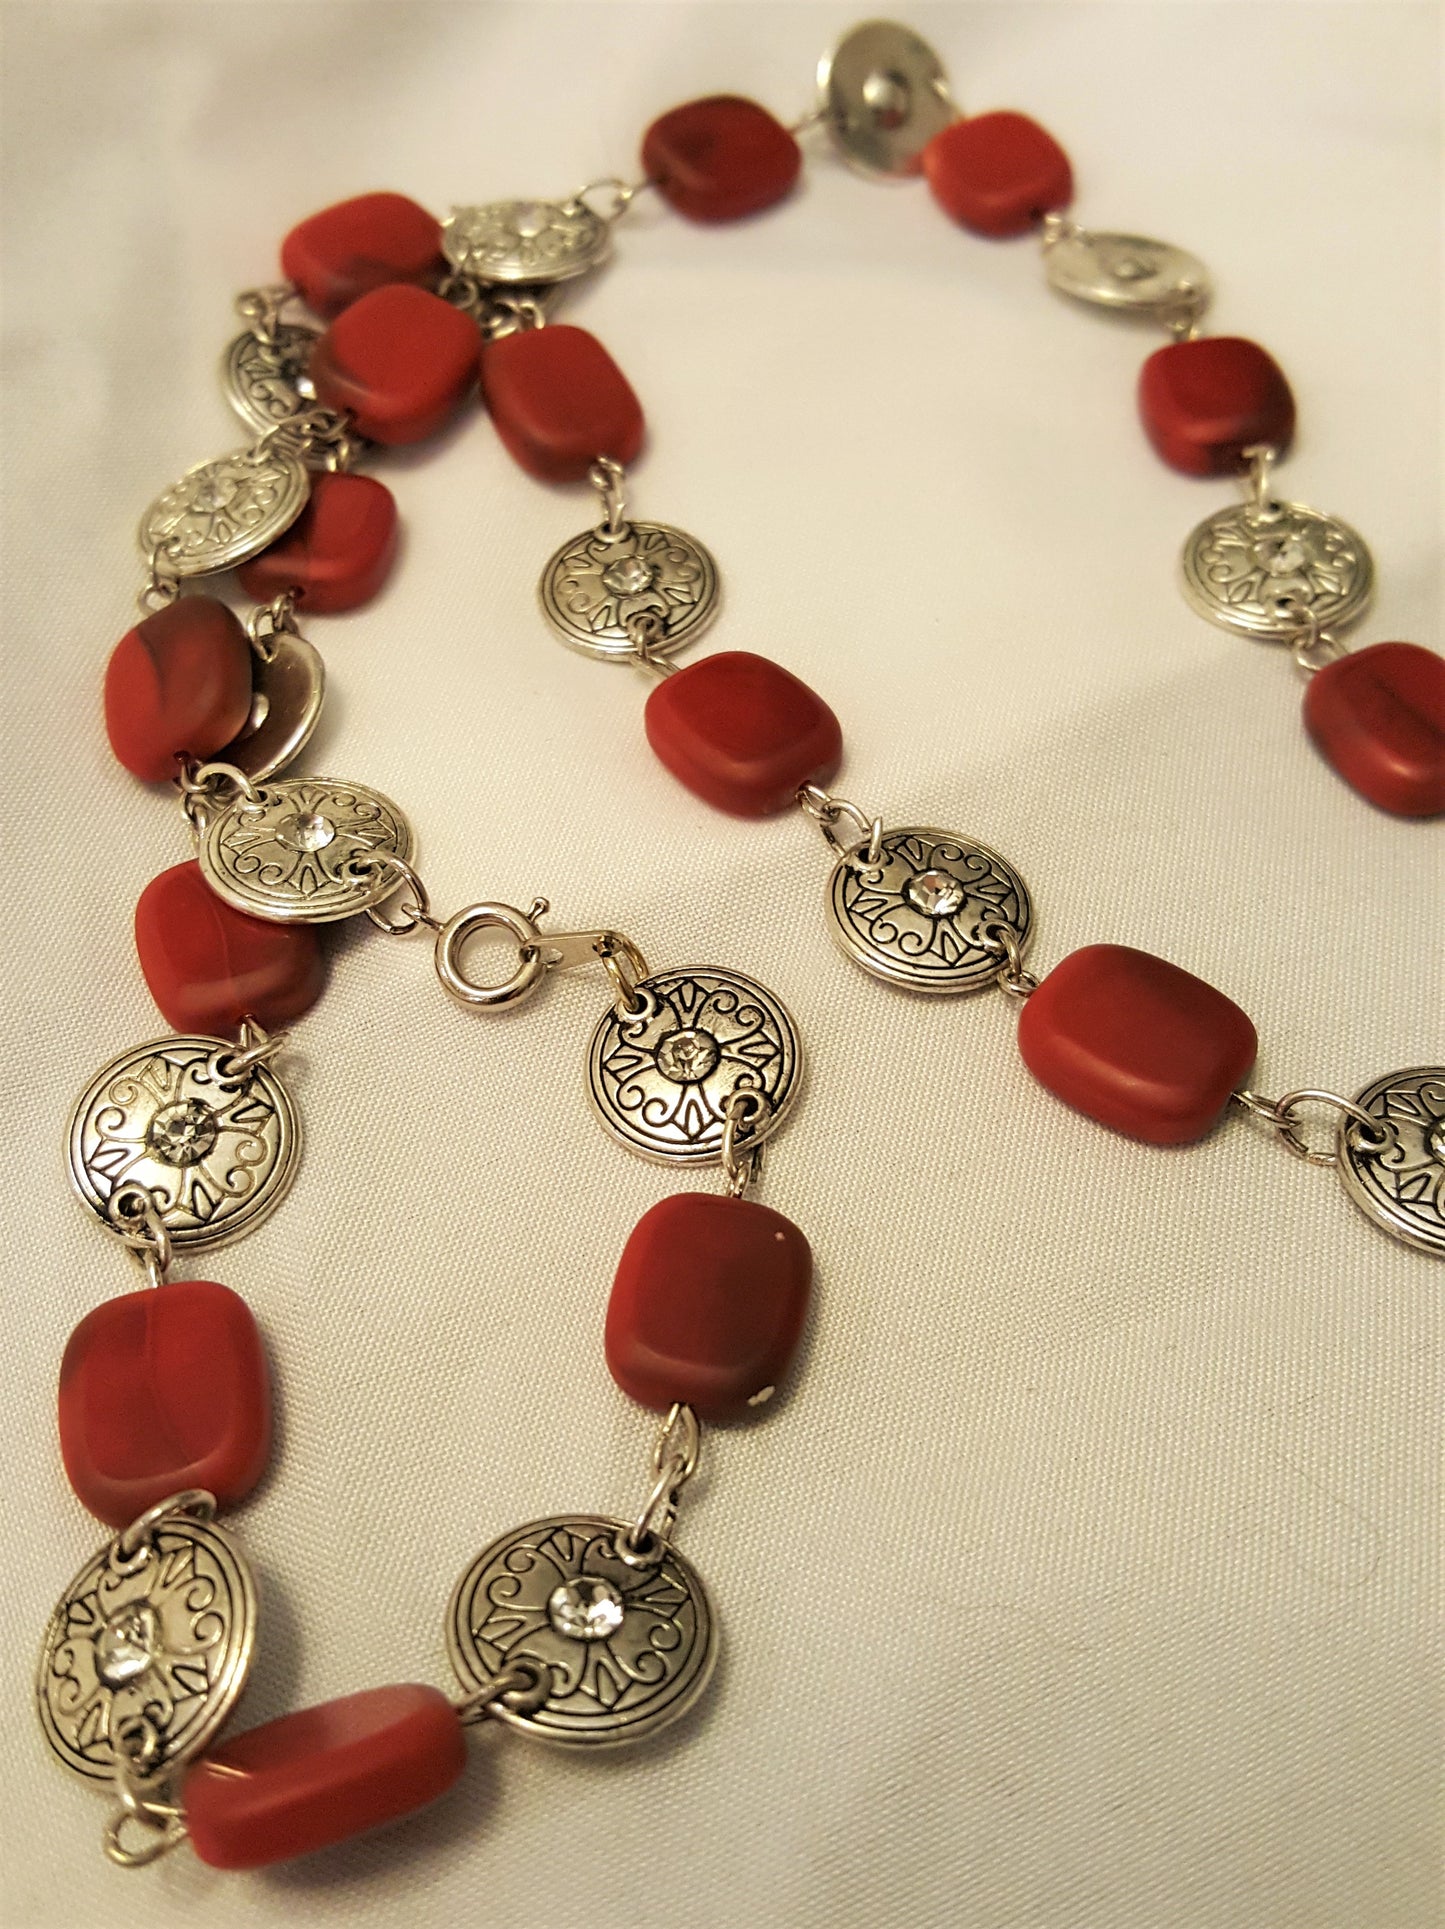 Red Jasper and Silver-tone Medallion Necklace, Bracelet, and Earrings